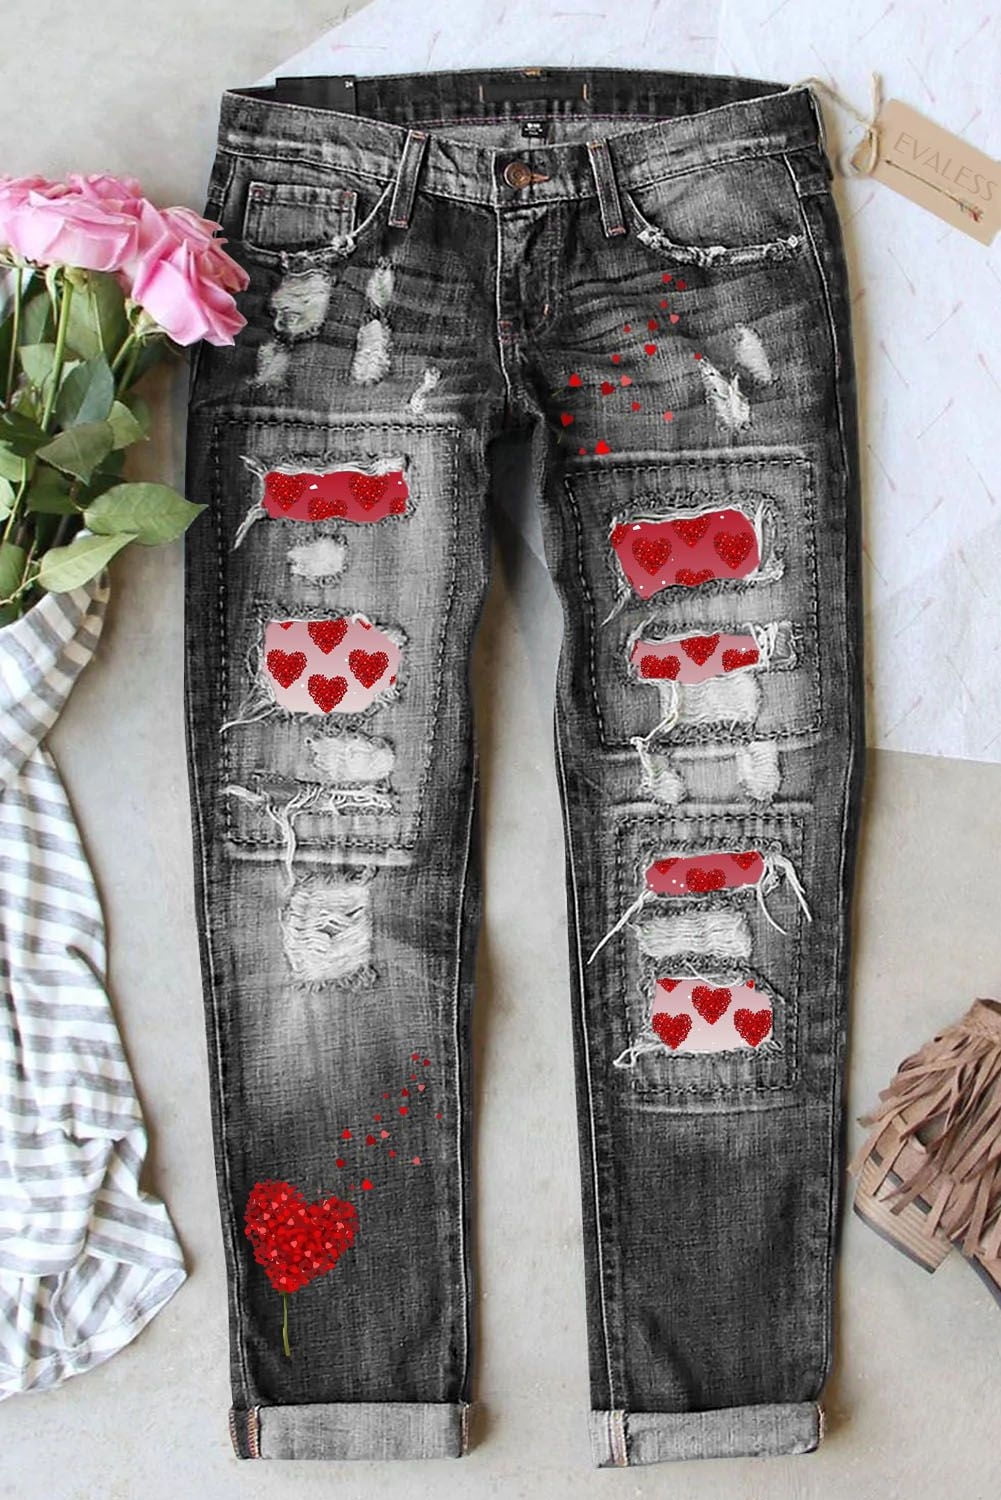 Do you wear normal jeans, ripped jeans or both? What is your style? - Quora